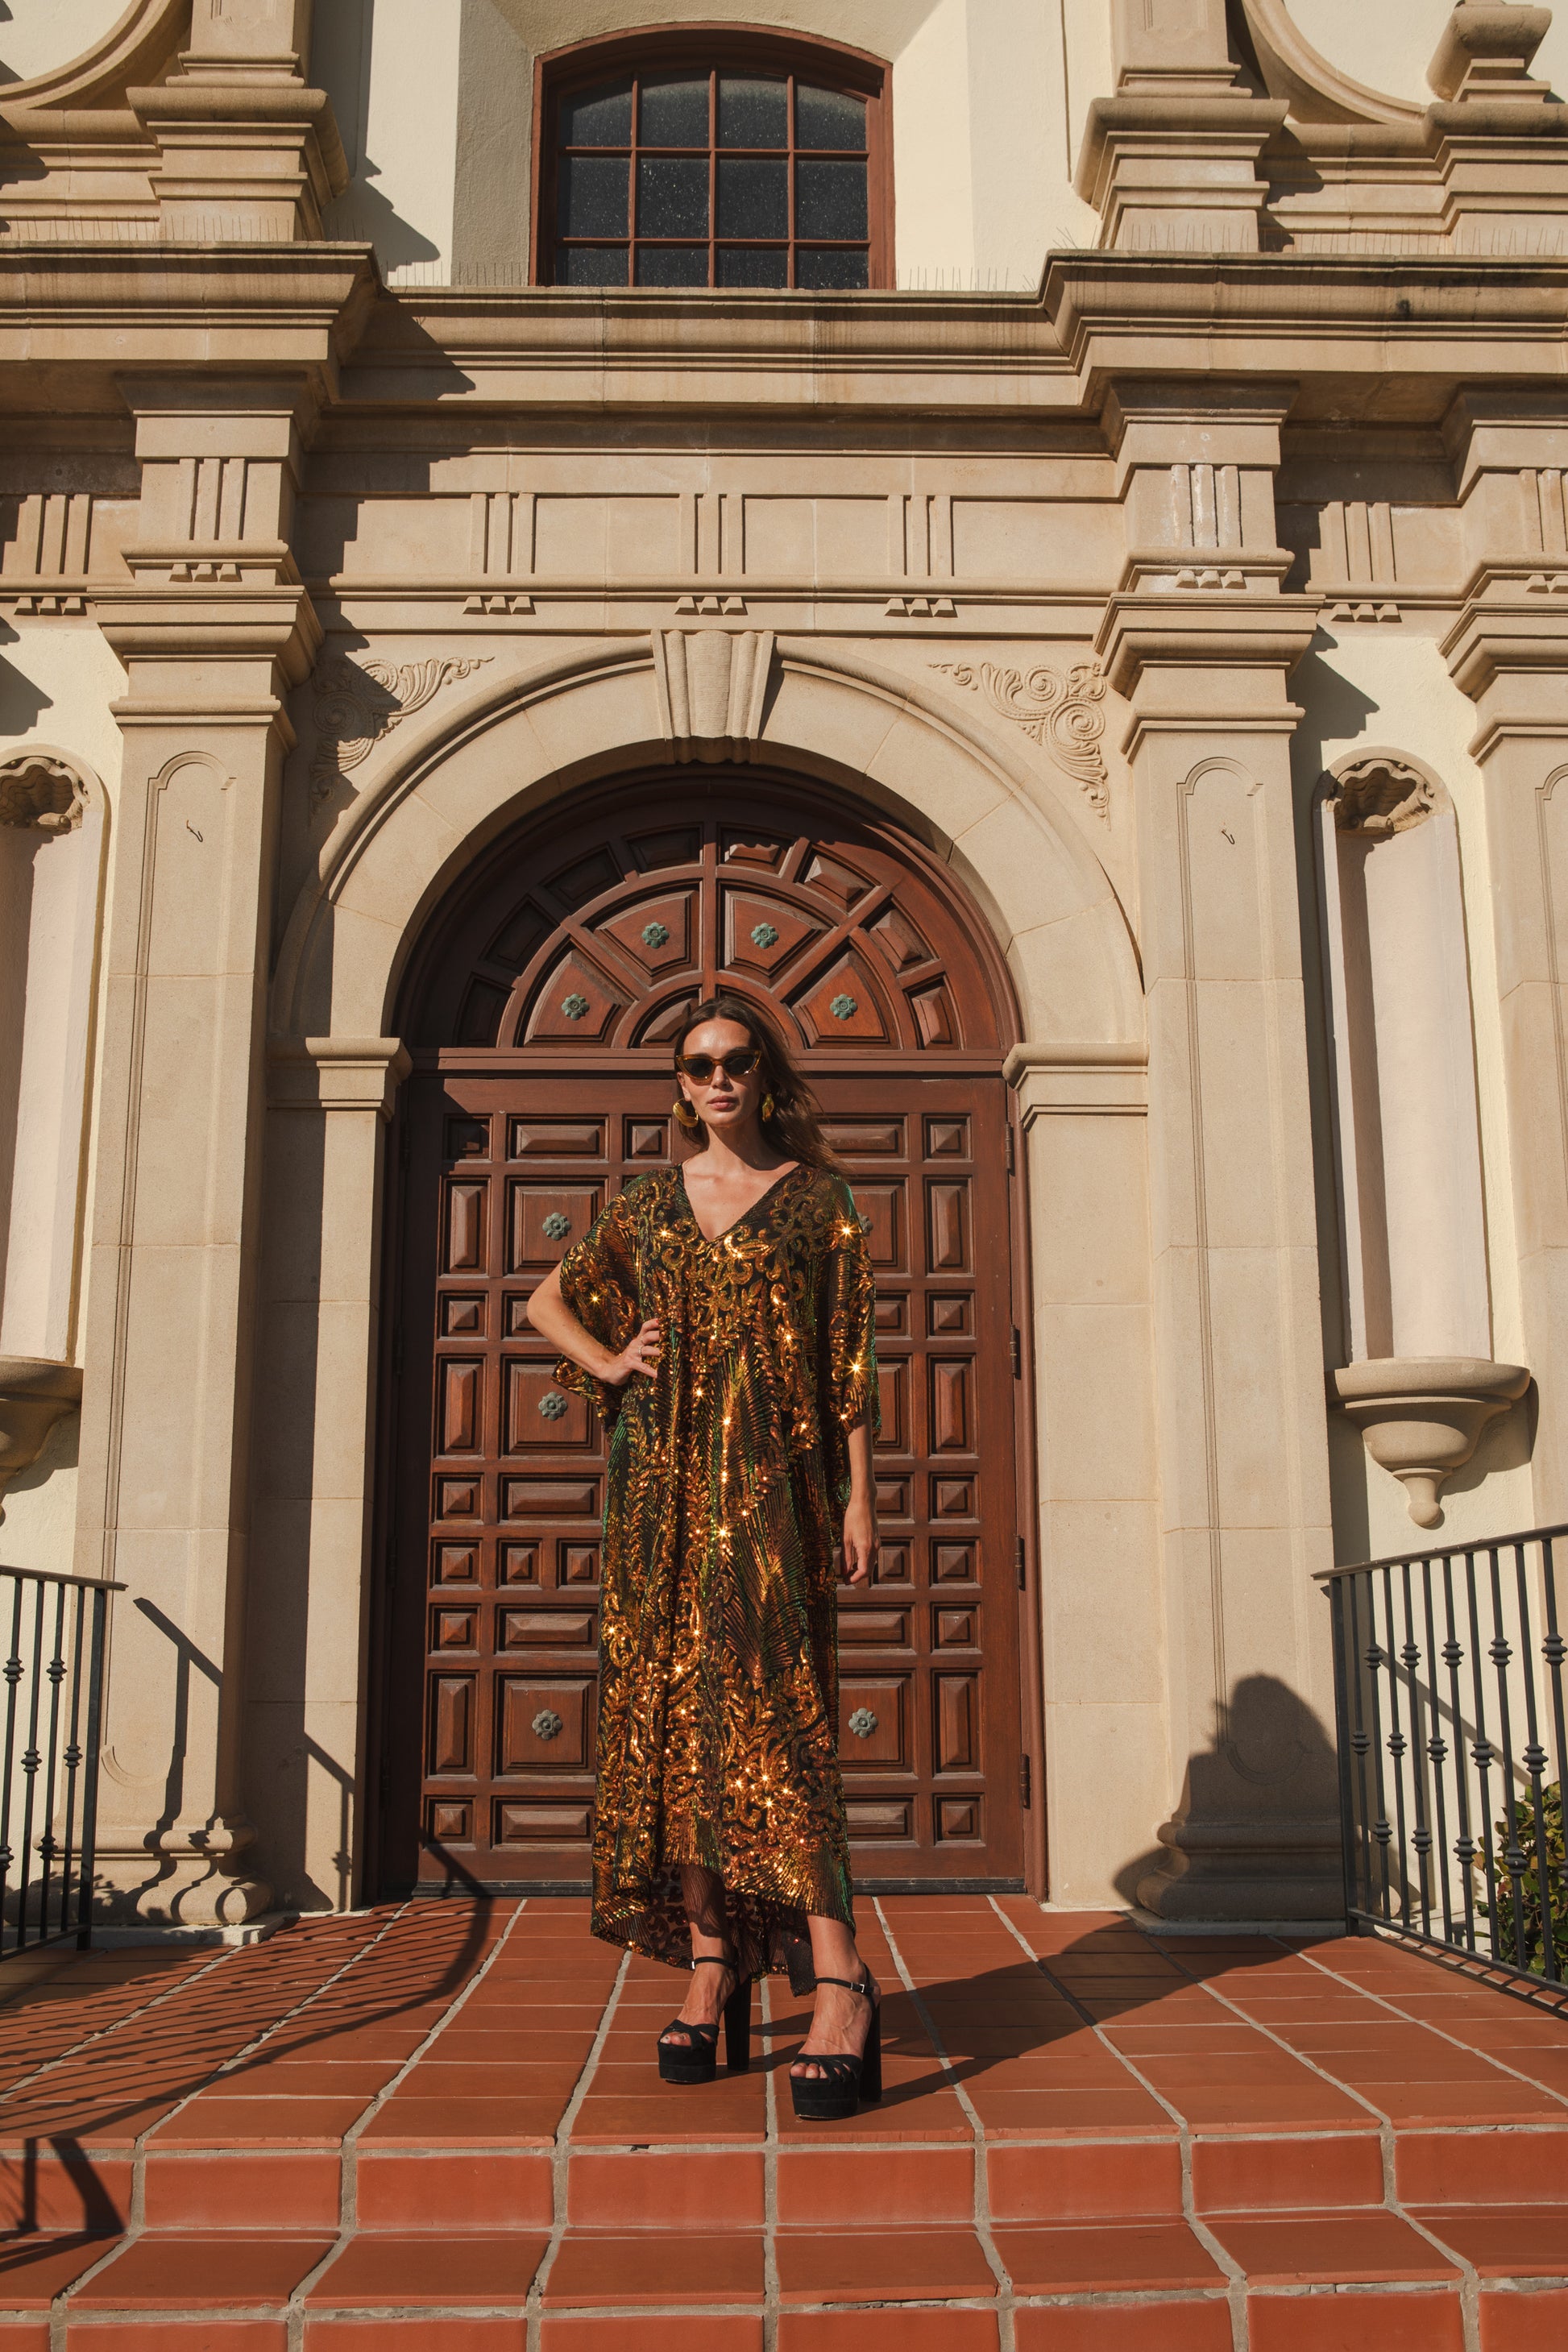 jennafer grace Eden Caftan stunning intricately sequined color shifting gold green sequin embellished mesh kaftan festive eye-catching holiday gown boho bohemian hippie romantic whimscial resort wear vacation wear night at the opera dress unisex handmade in California USA